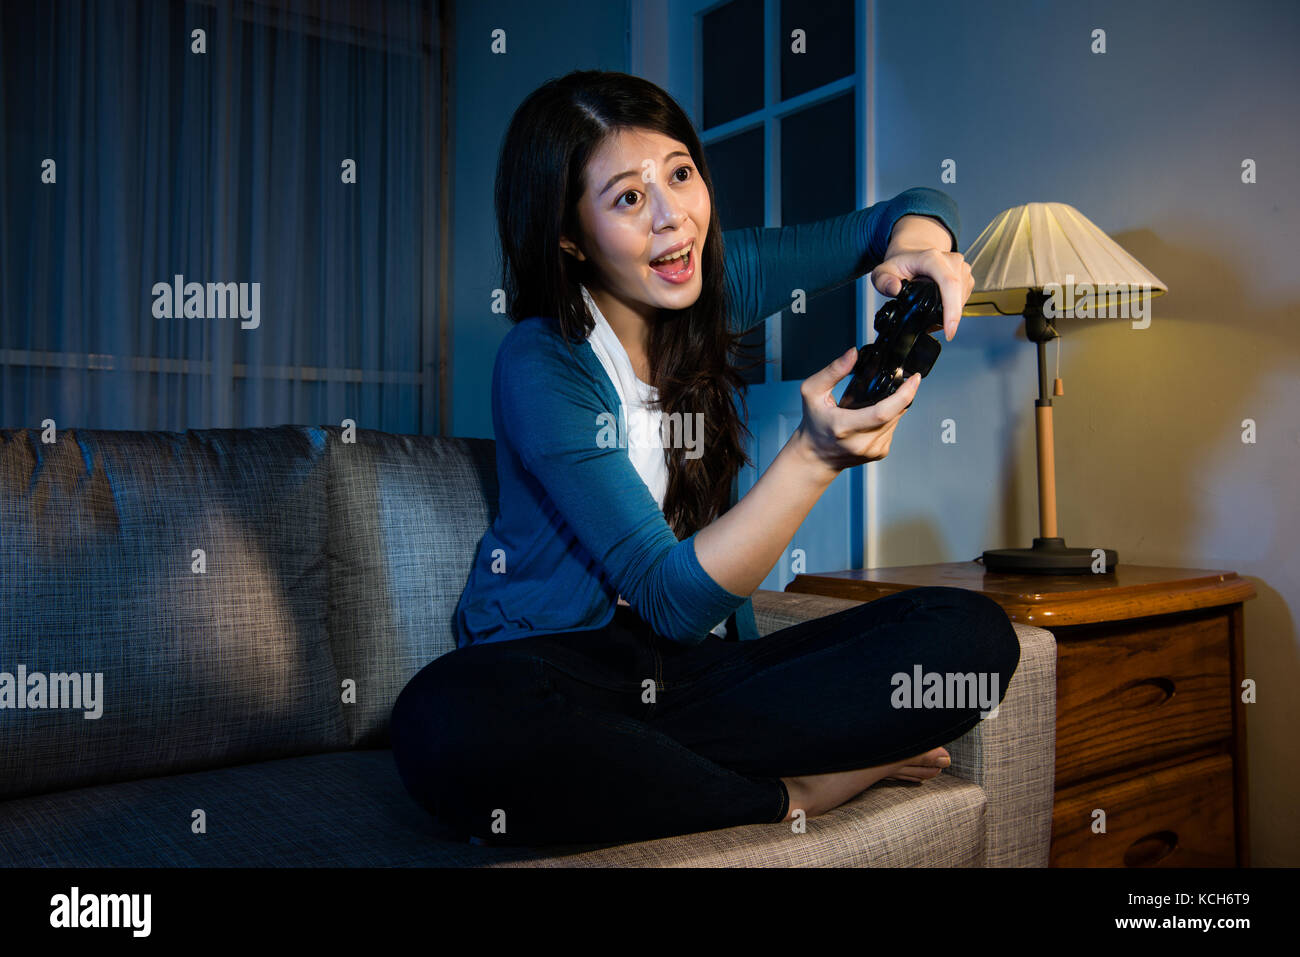 pretty happy female student relaxing playing tv video game and holding controller with move body sitting in living room sofa couch at night. Stock Photo